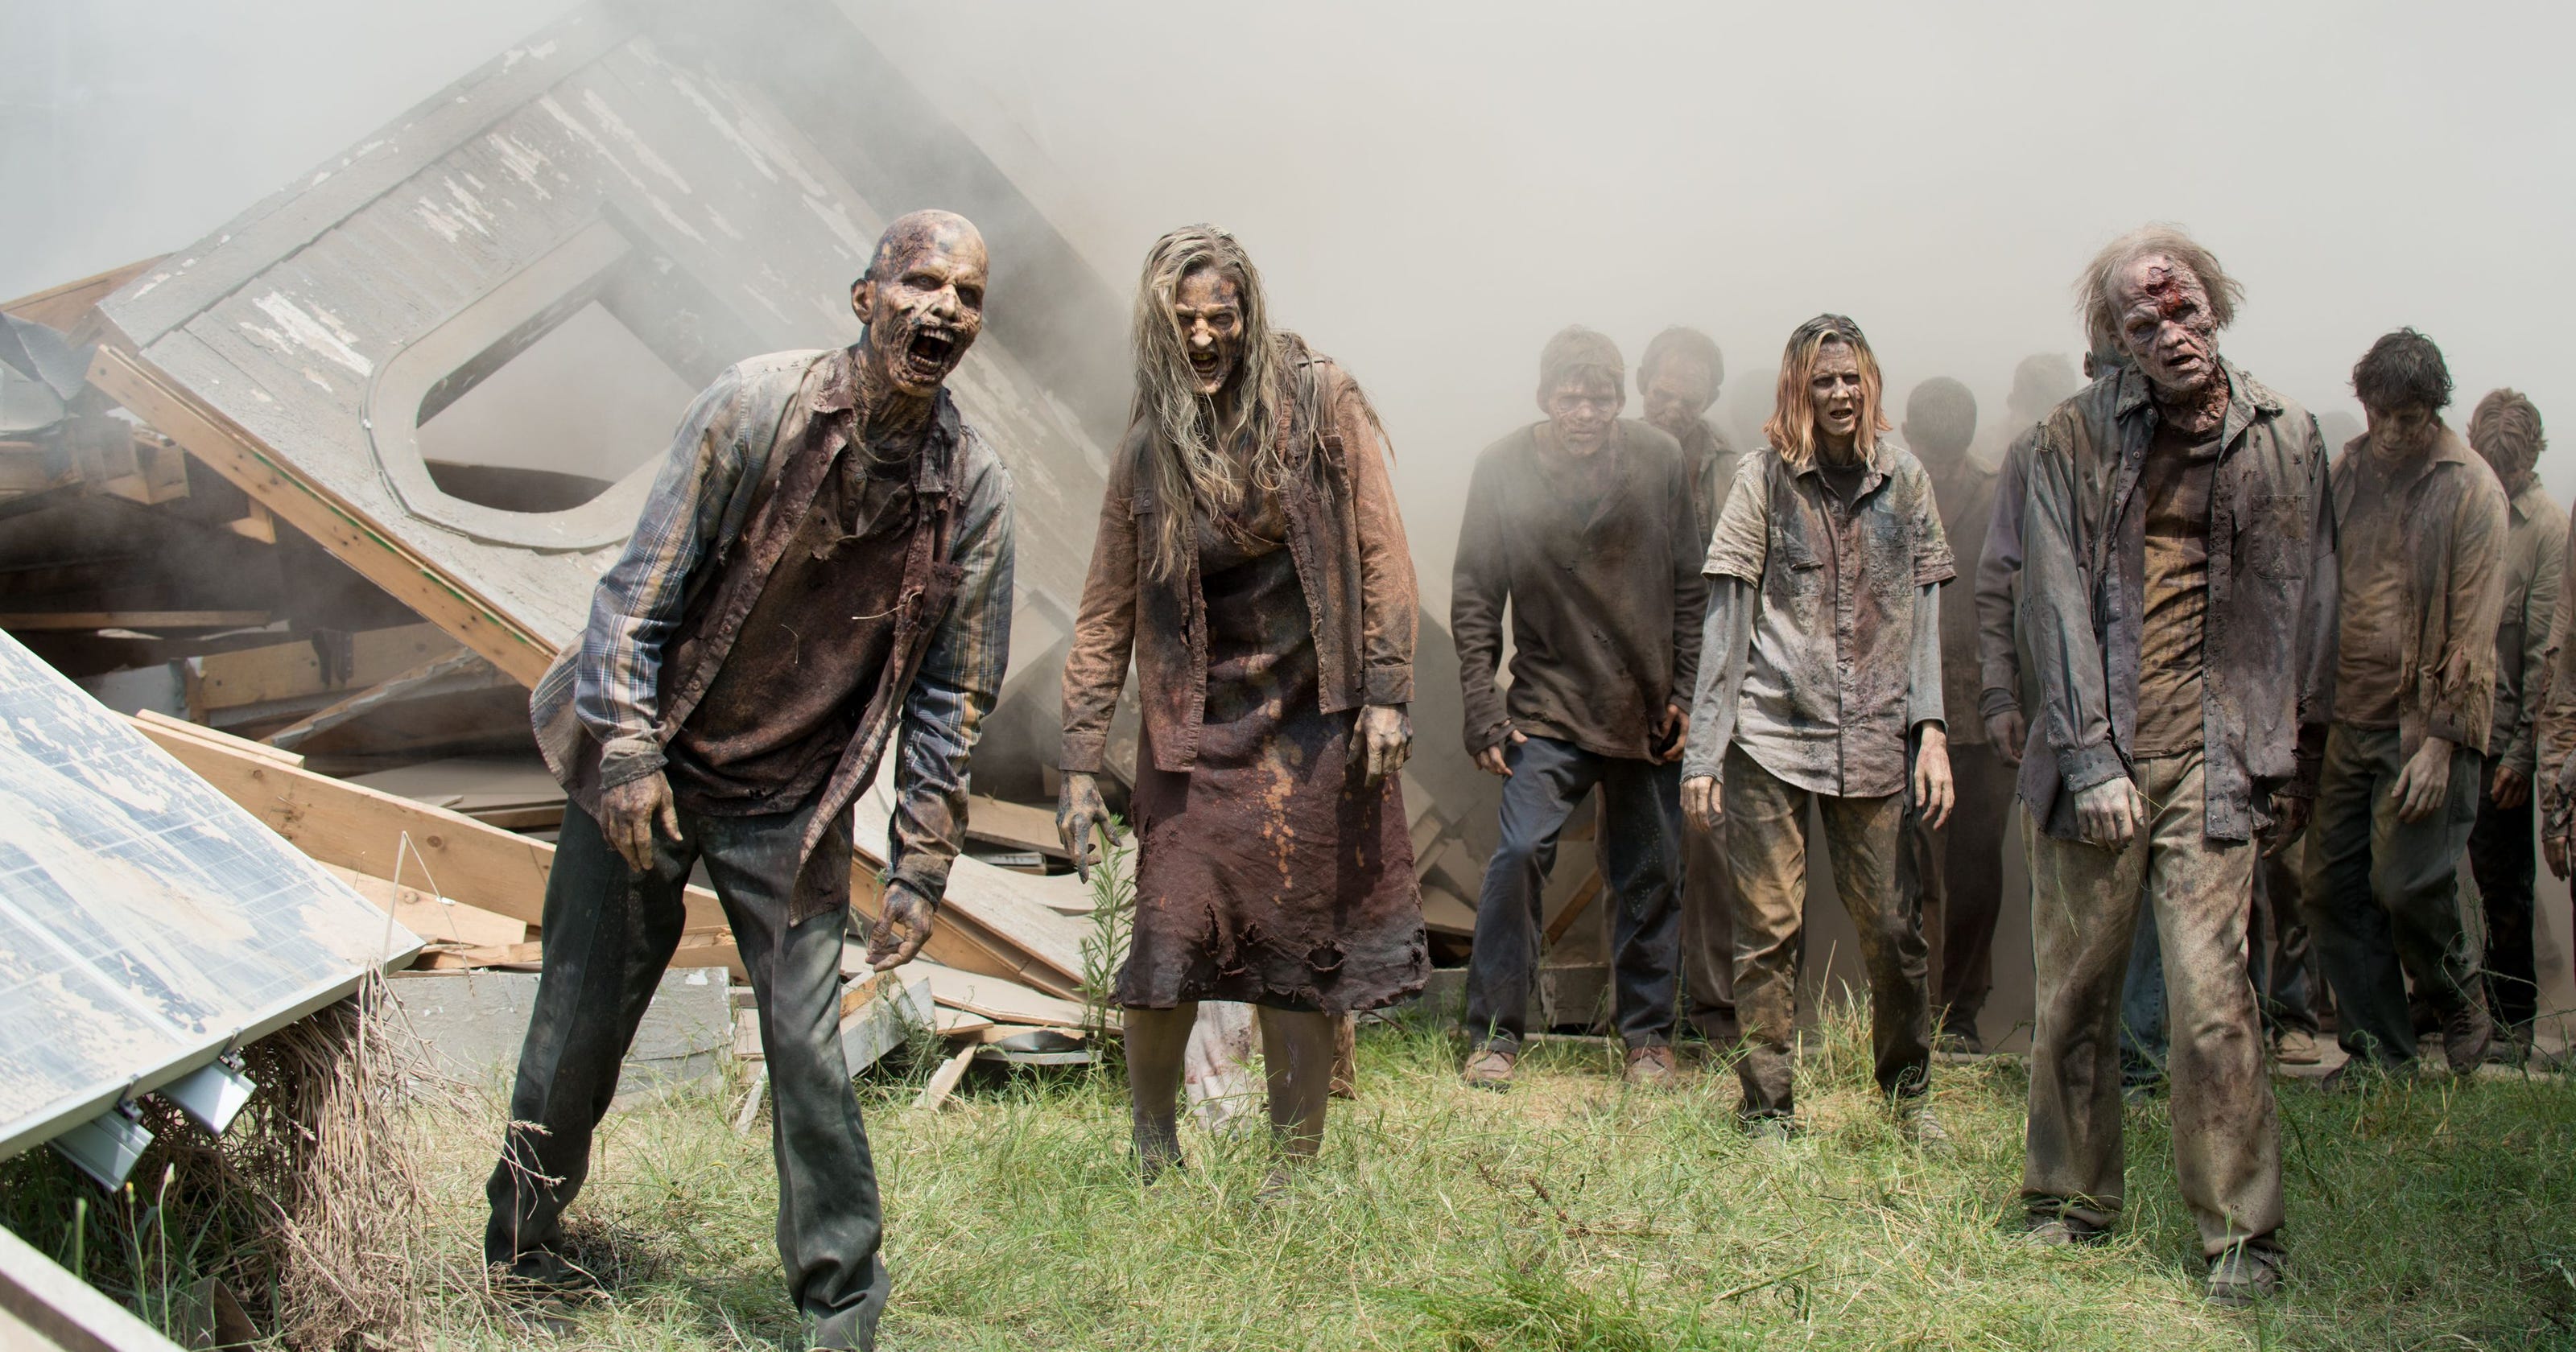 💀 How Well Do You Know “The Walking Dead”? Walking Dead The Walking Dead zombies